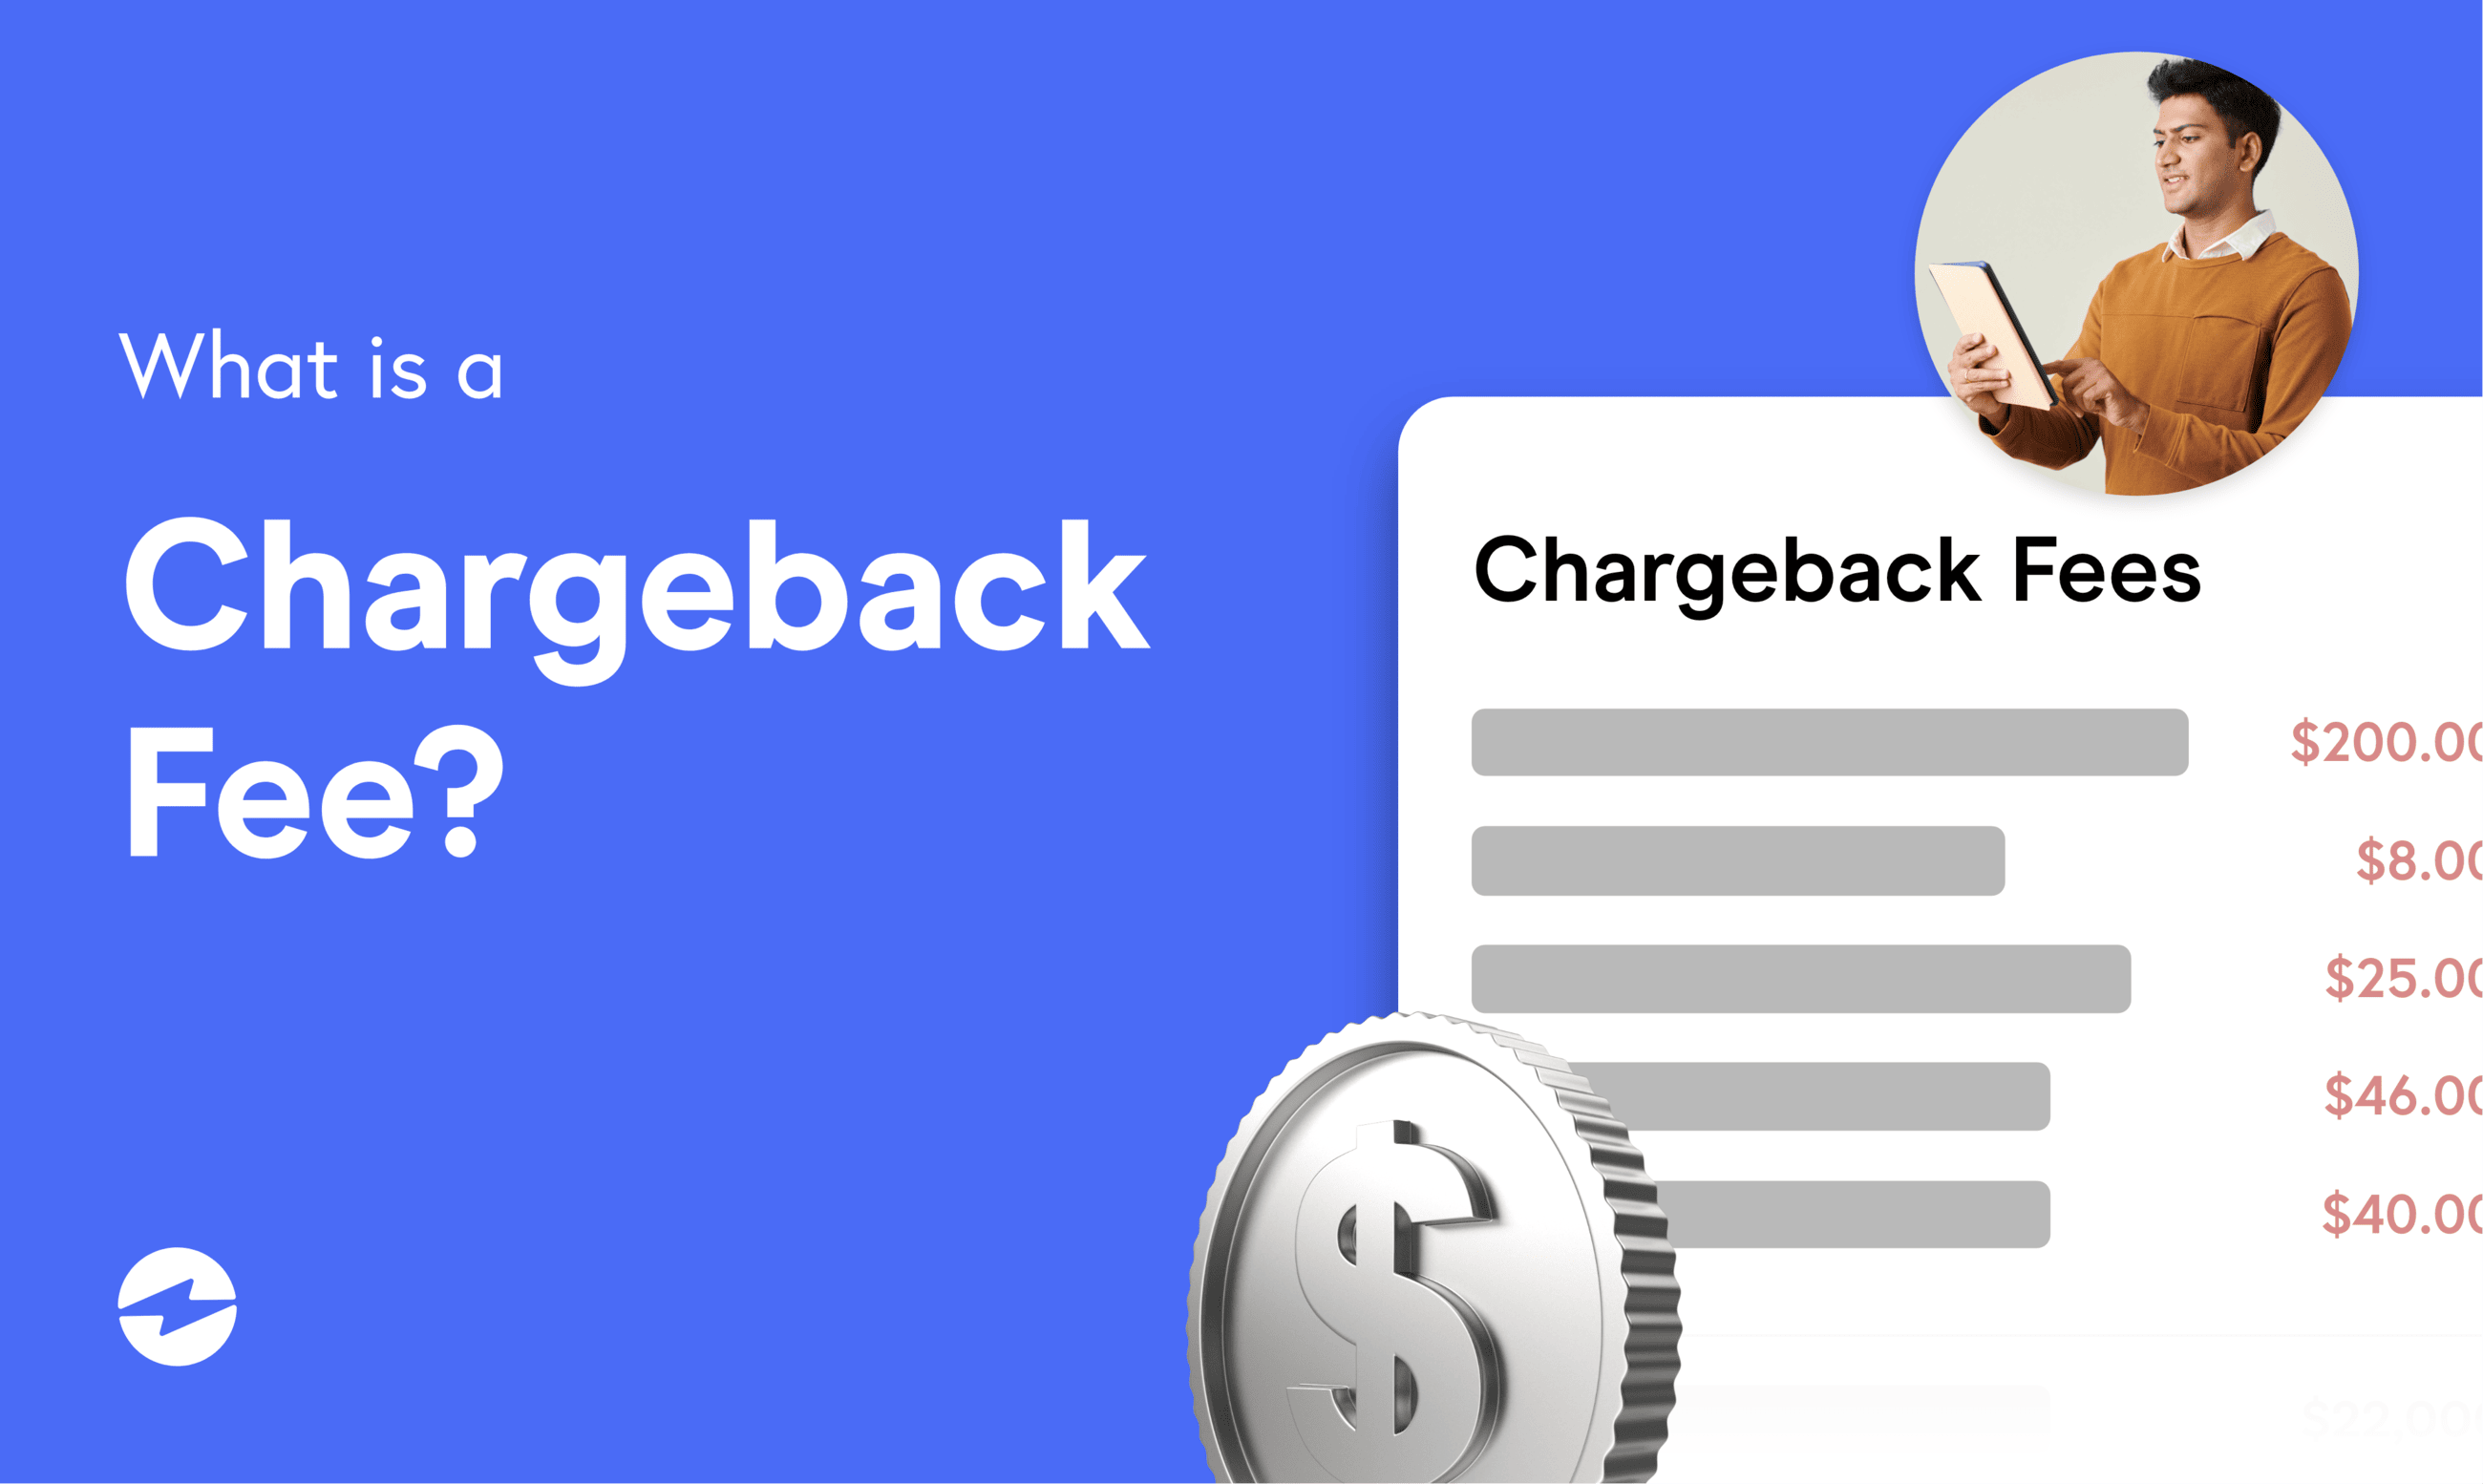 What is a Chargeback Fee